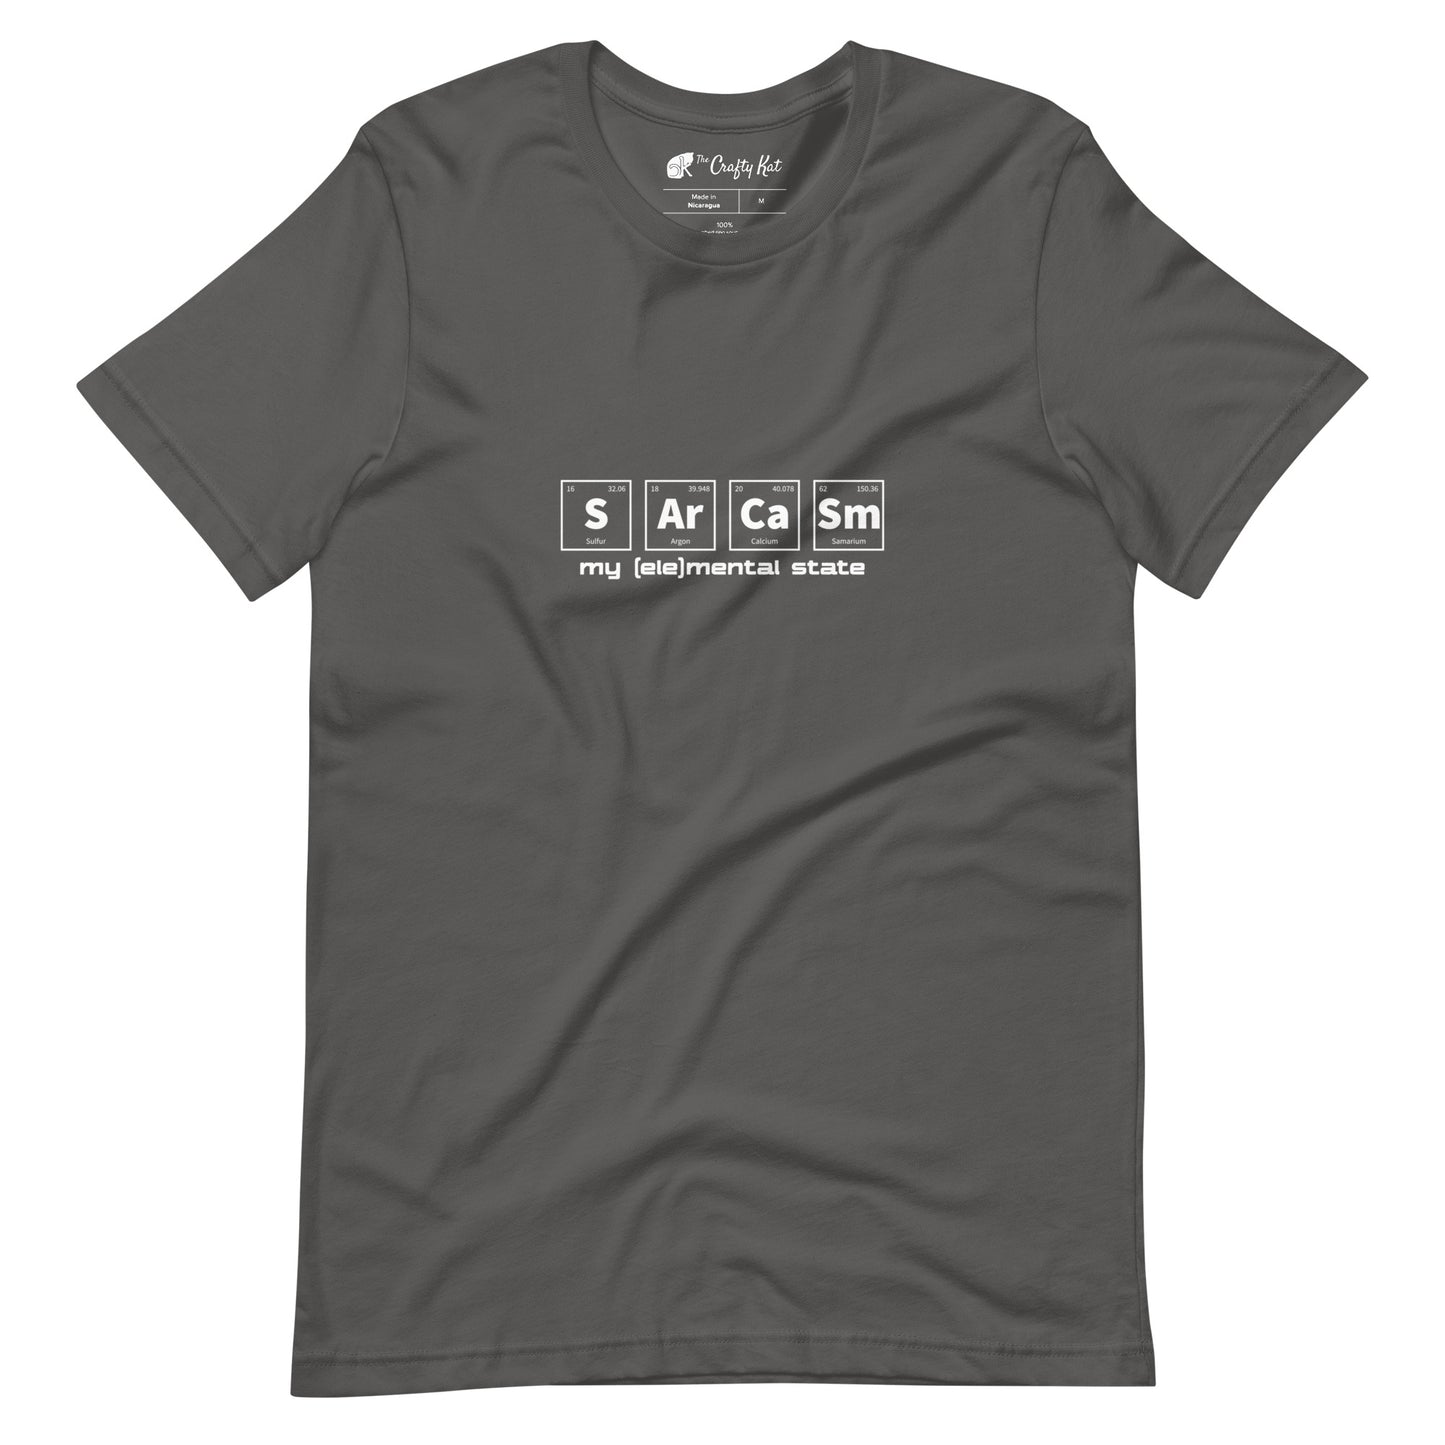 Asphalt grey t-shirt with graphic of periodic table of elements symbols for Sulfur (S), Argon (Ar), Calcium (Ca), and Samarium (Sm) and text "my (ele)mental state"